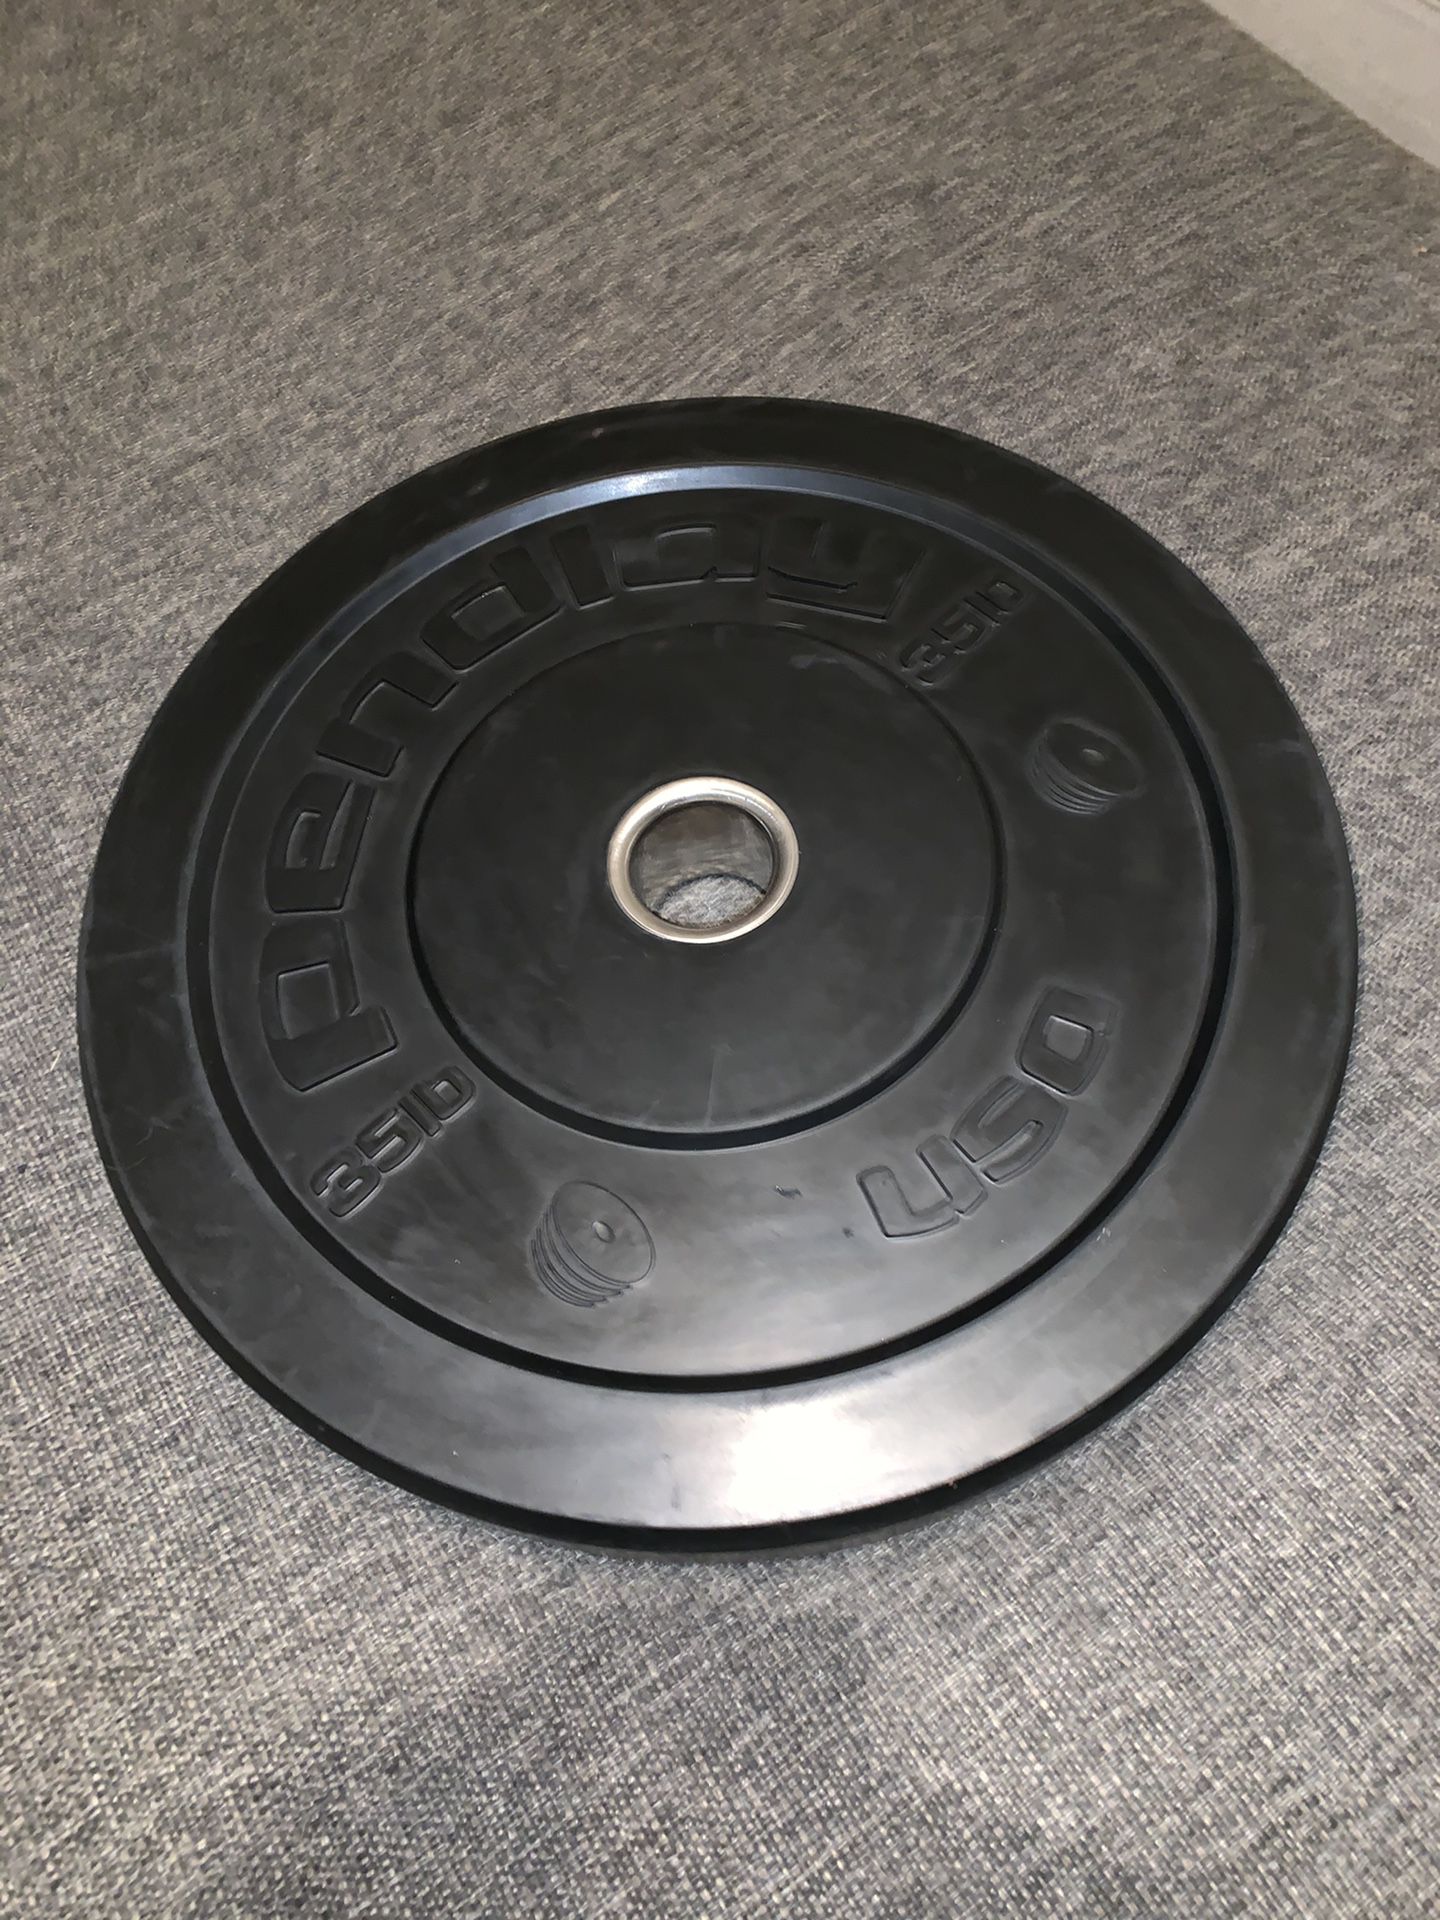 35 lb Pendlay Olympic Rubber Bumper Plate (only one plate)